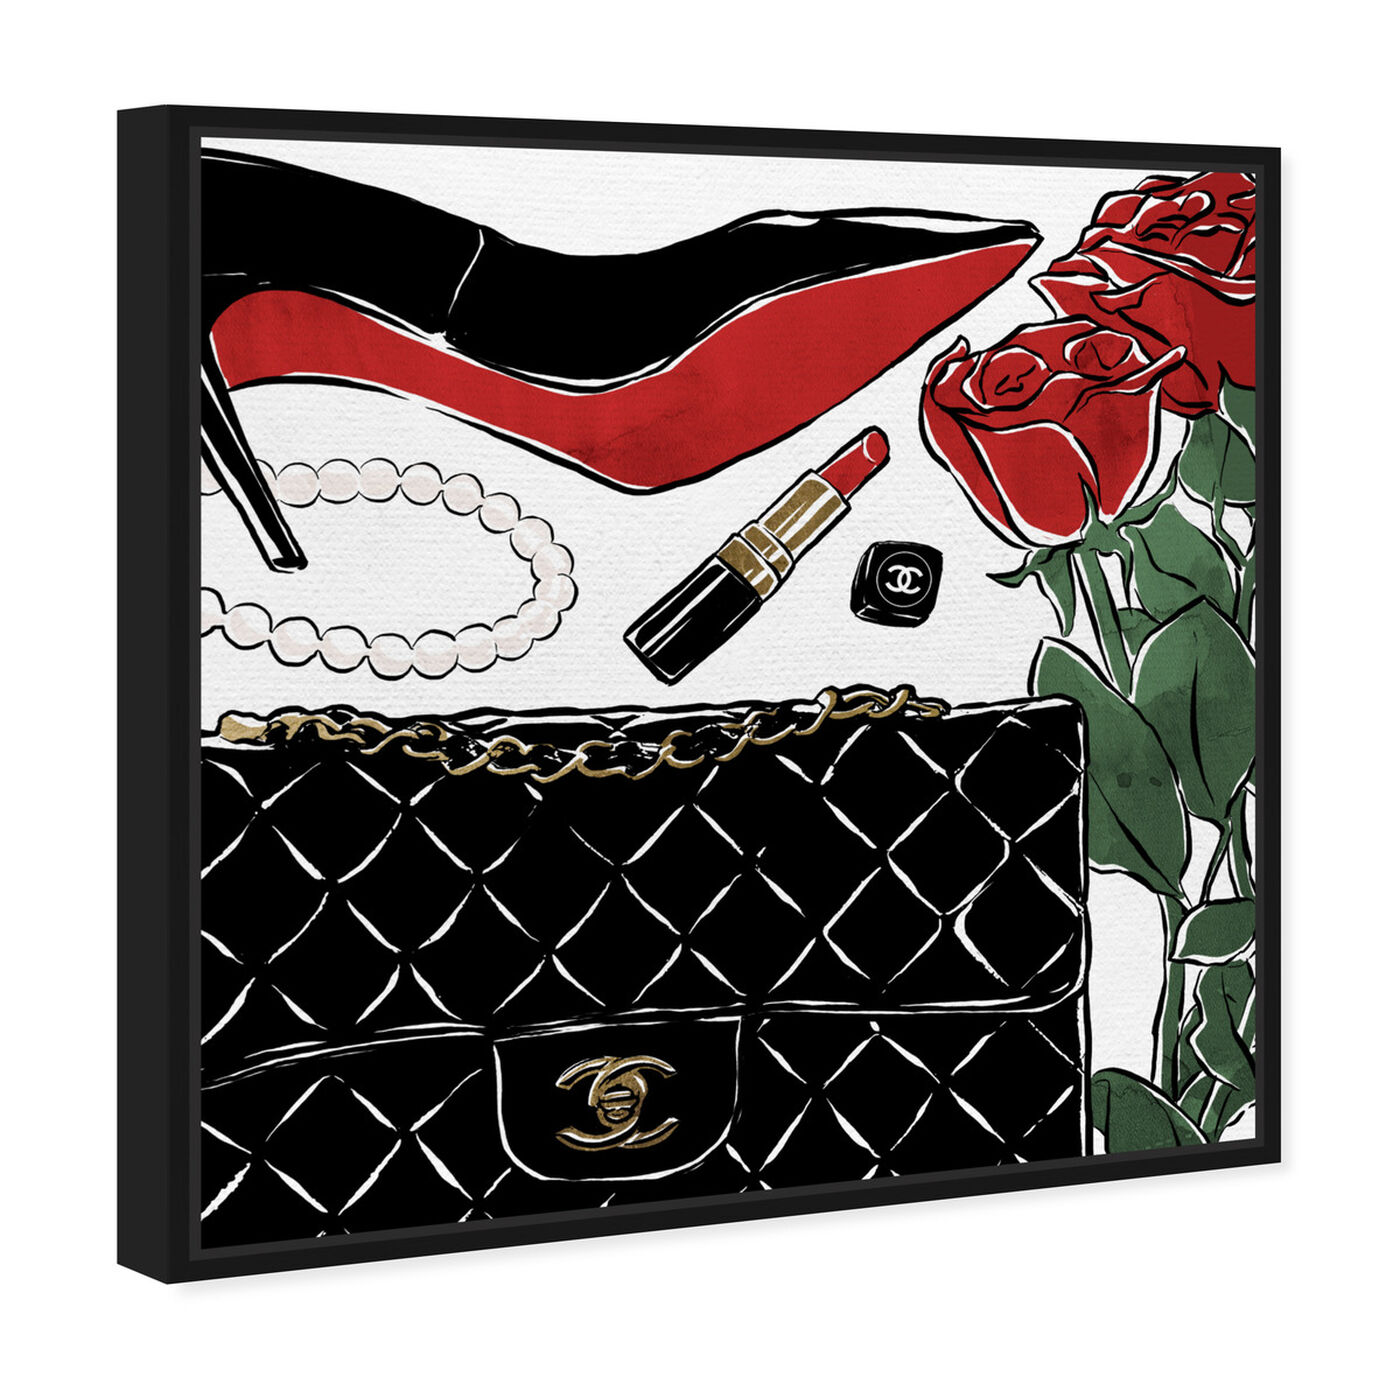 Angled view of Red Roses and Black Purses featuring fashion and glam and shoes art.